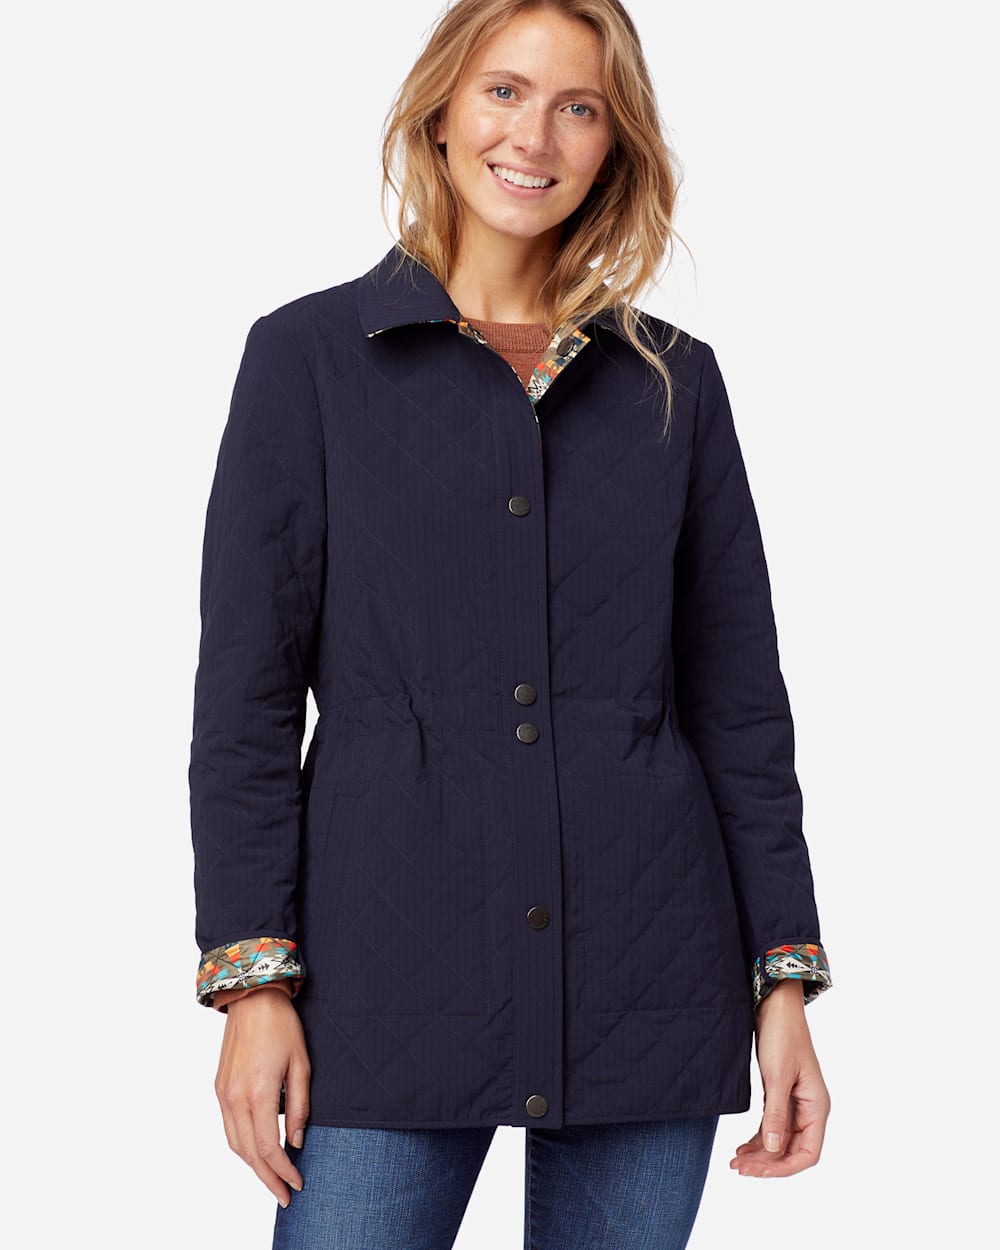 ALTERNATE VIEW OF WOMEN'S MEADOW REVERSIBLE QUILTED JACKET IN TUCSON/NAVY image number 2